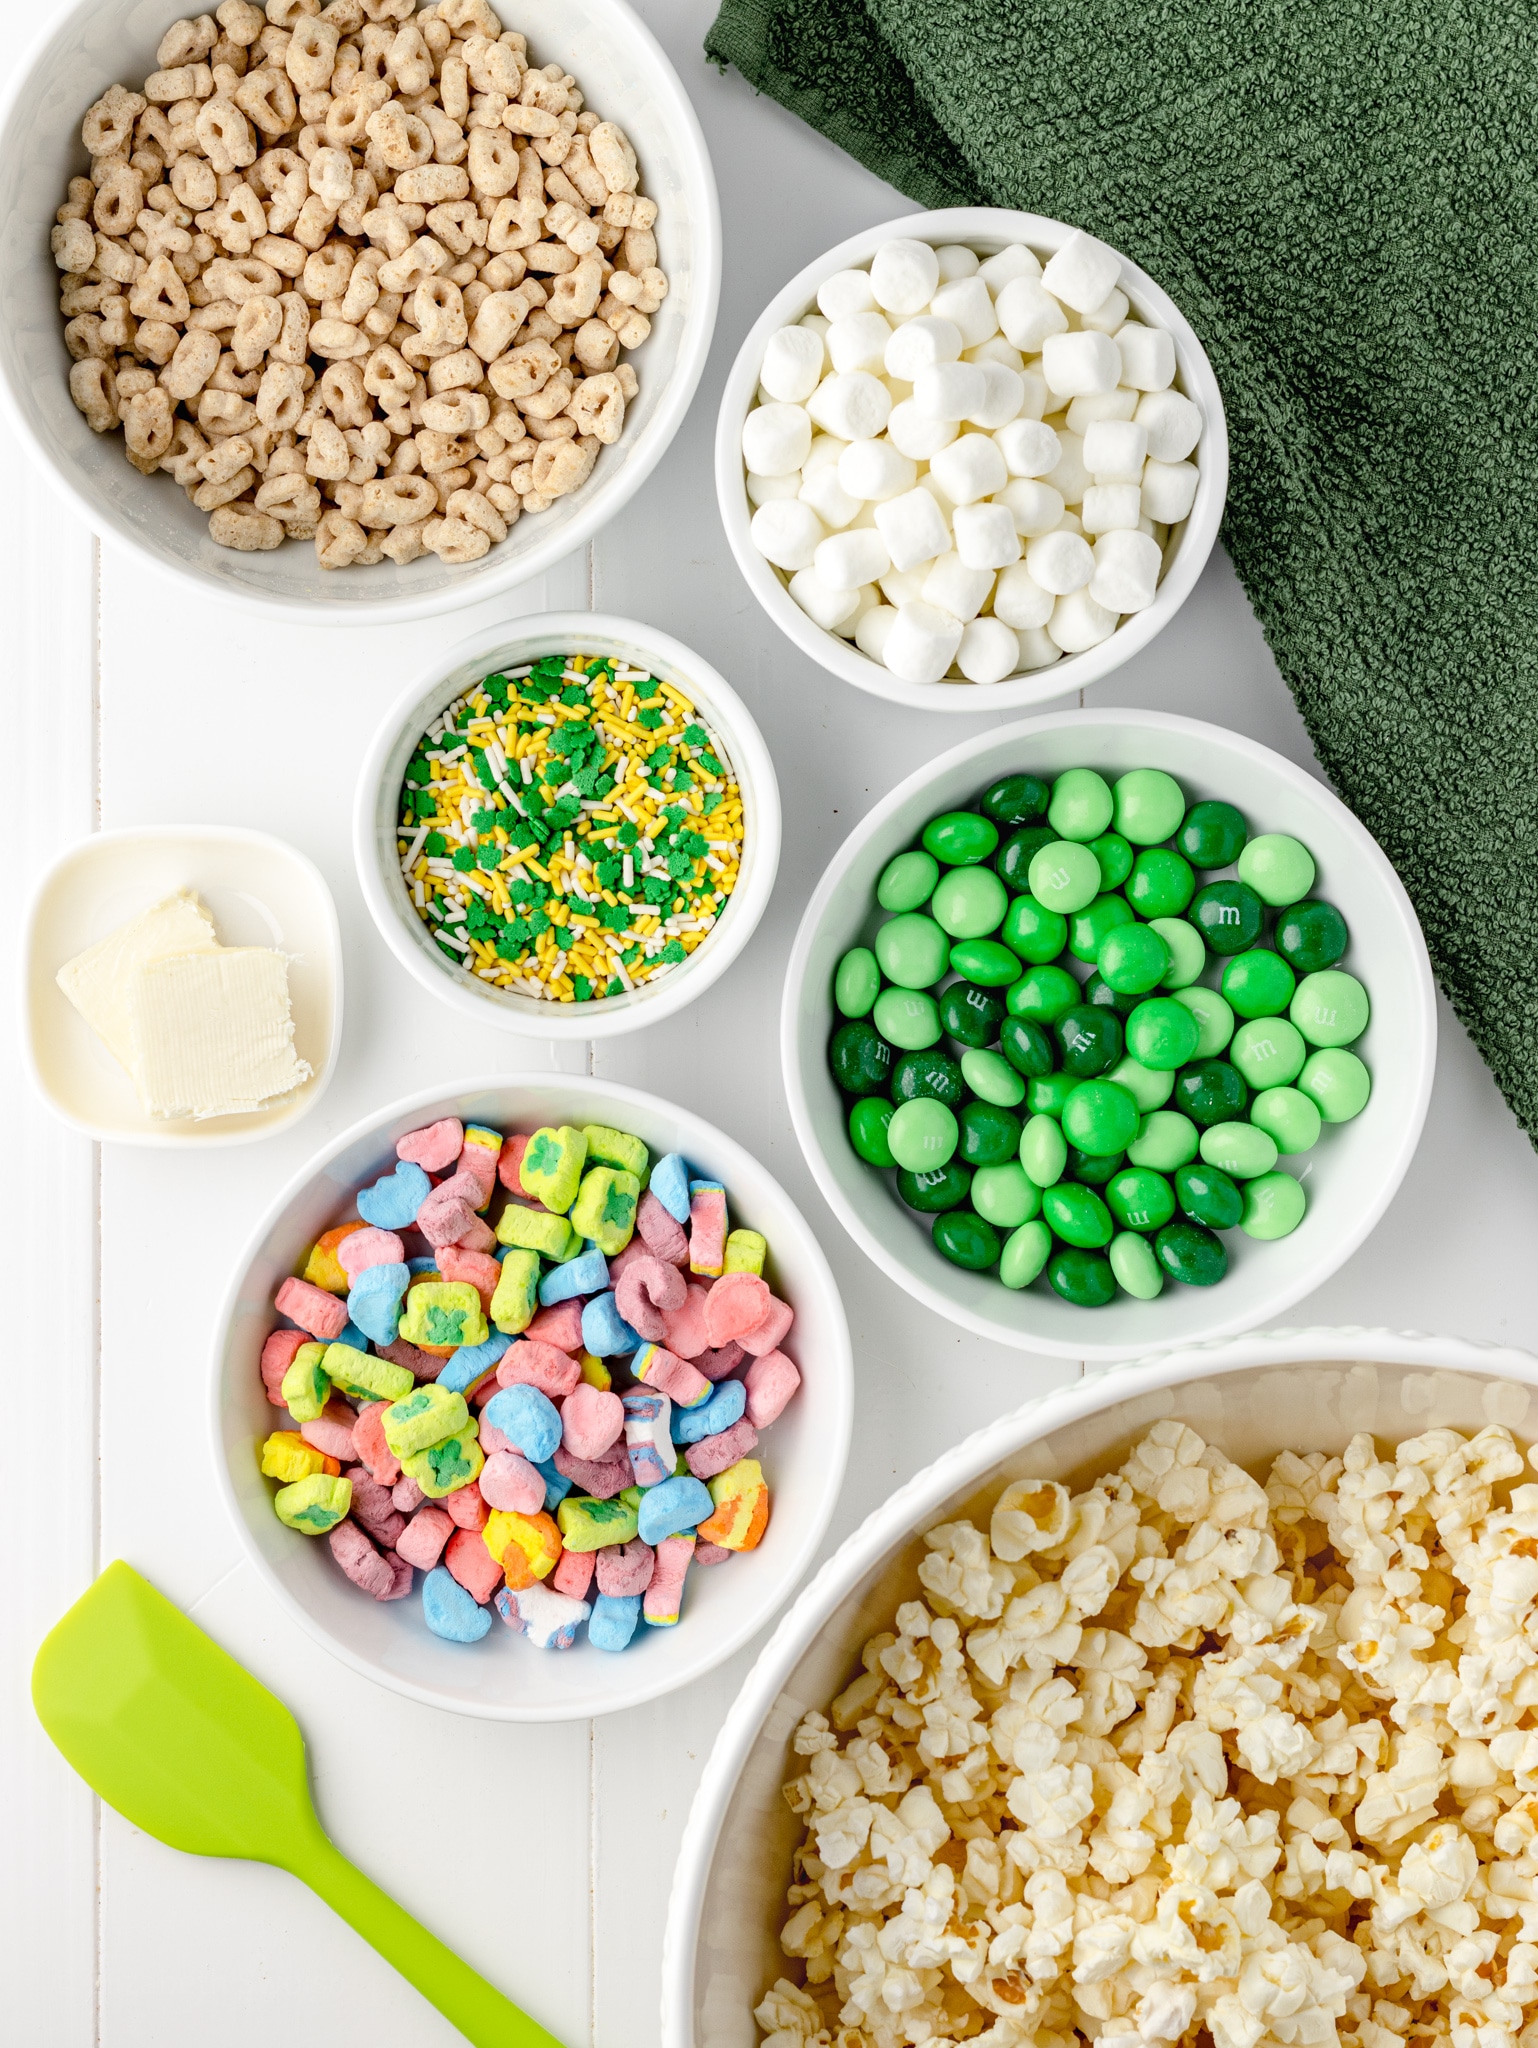 Ingredients for Loaded Leprechaun Popcorn. popcorn, lucky charms cereal, butter, mini marshmallows, butter, sprinkles.